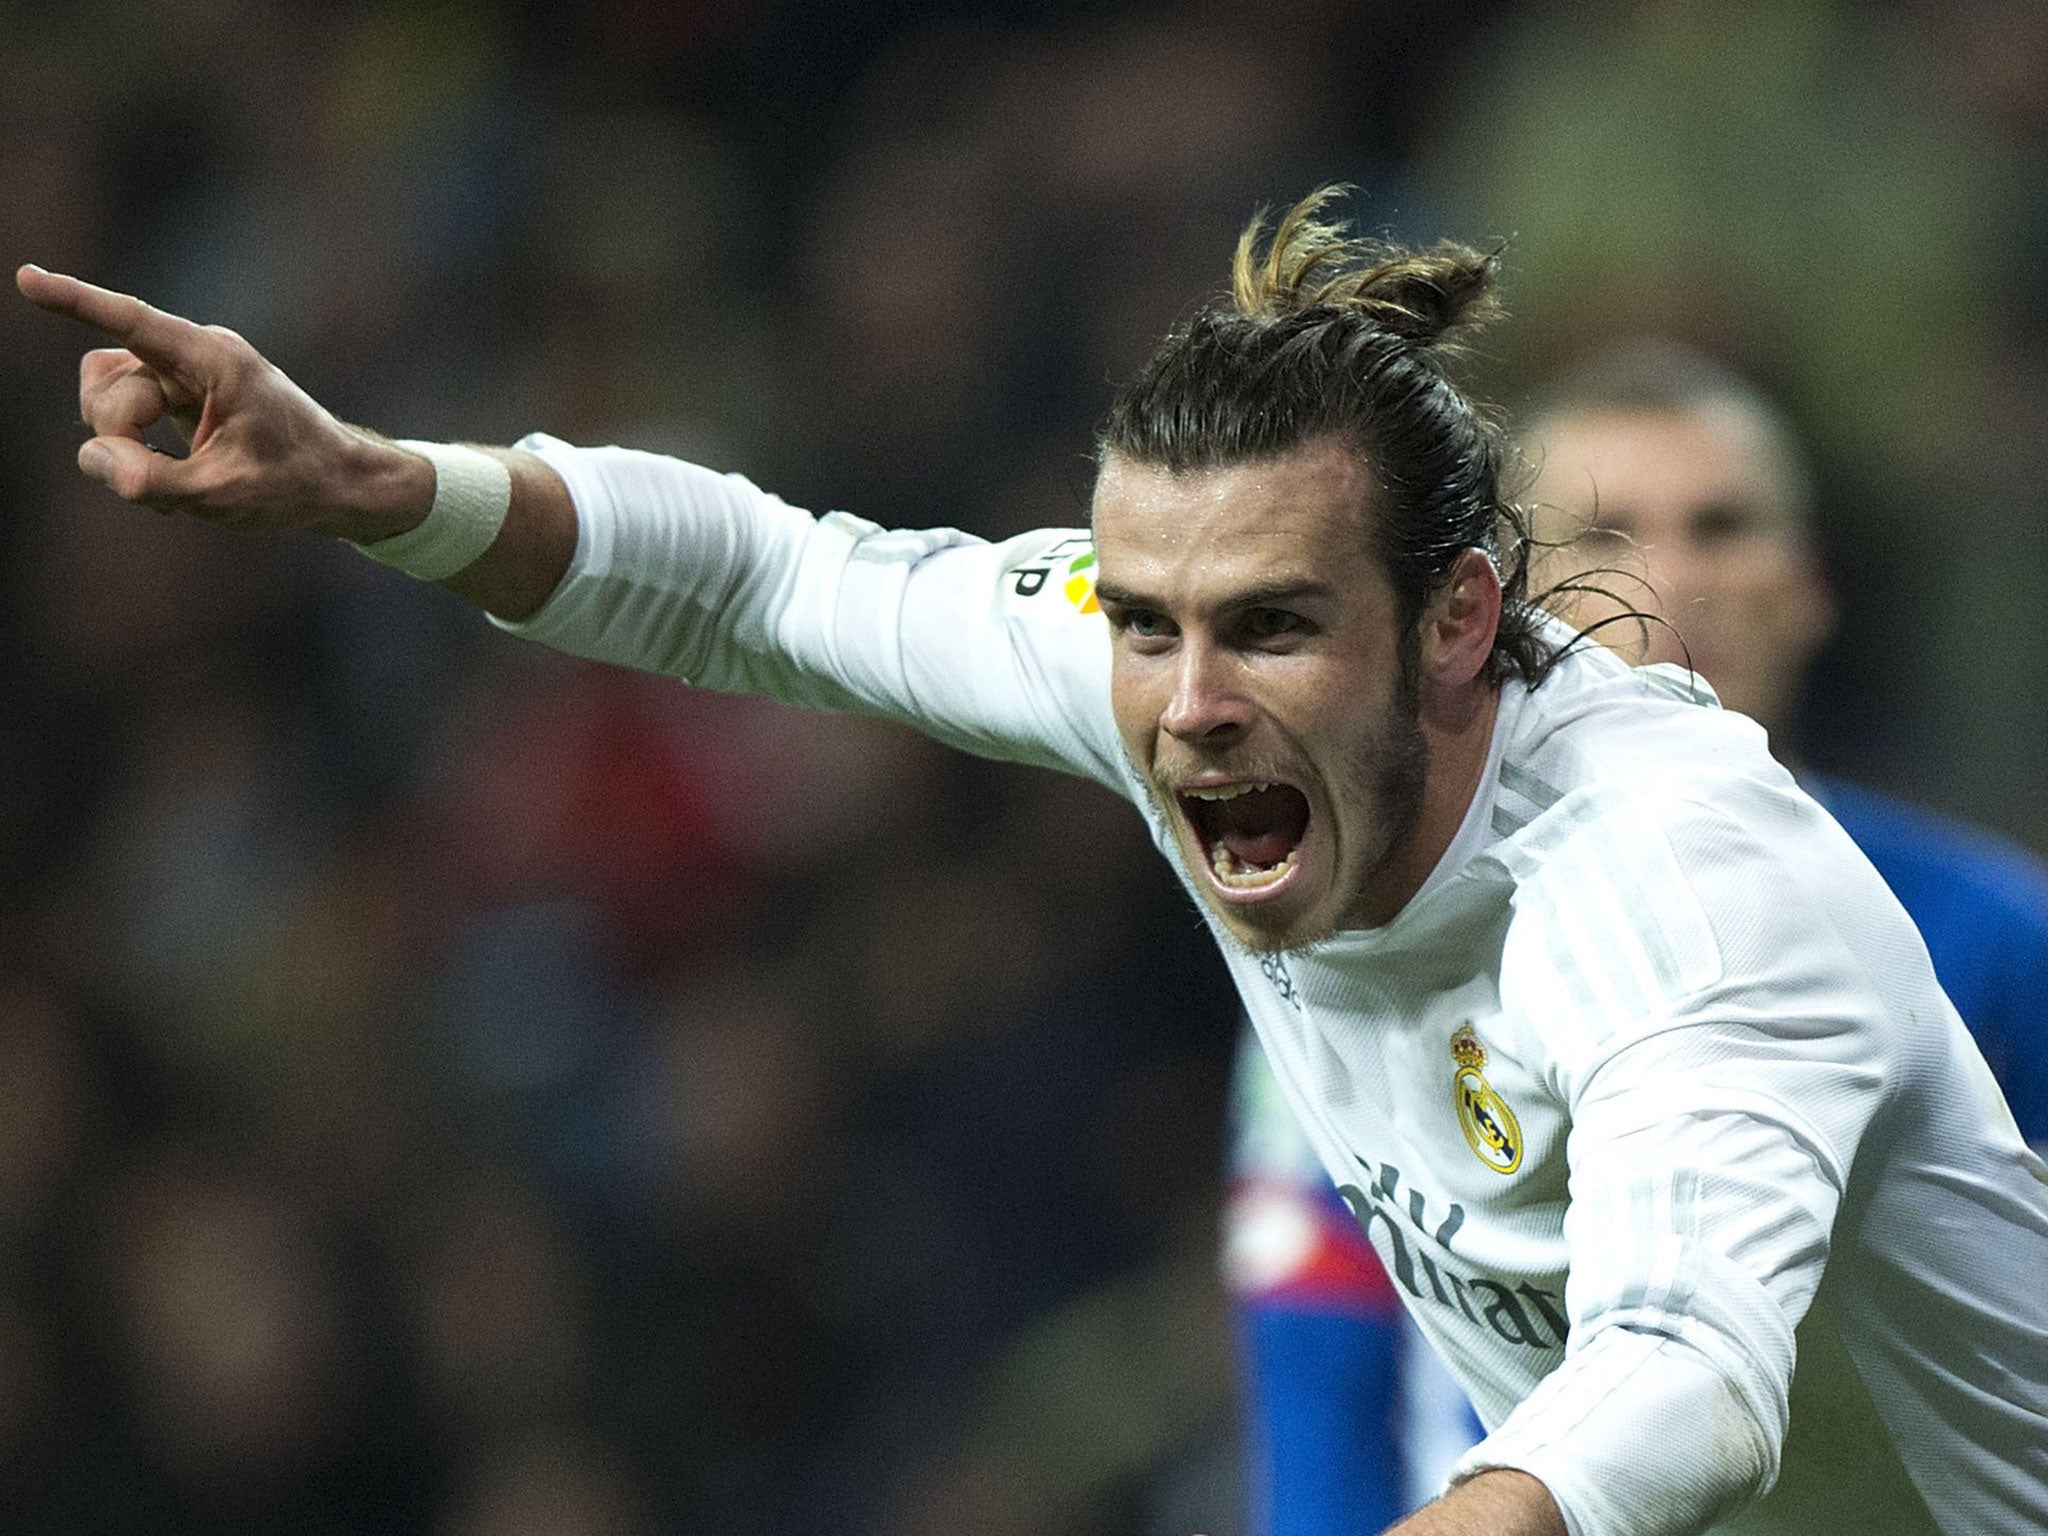 Gareth Bale scored a hat-trick for Real in new manager Zinedine Zidane’s first match in charge